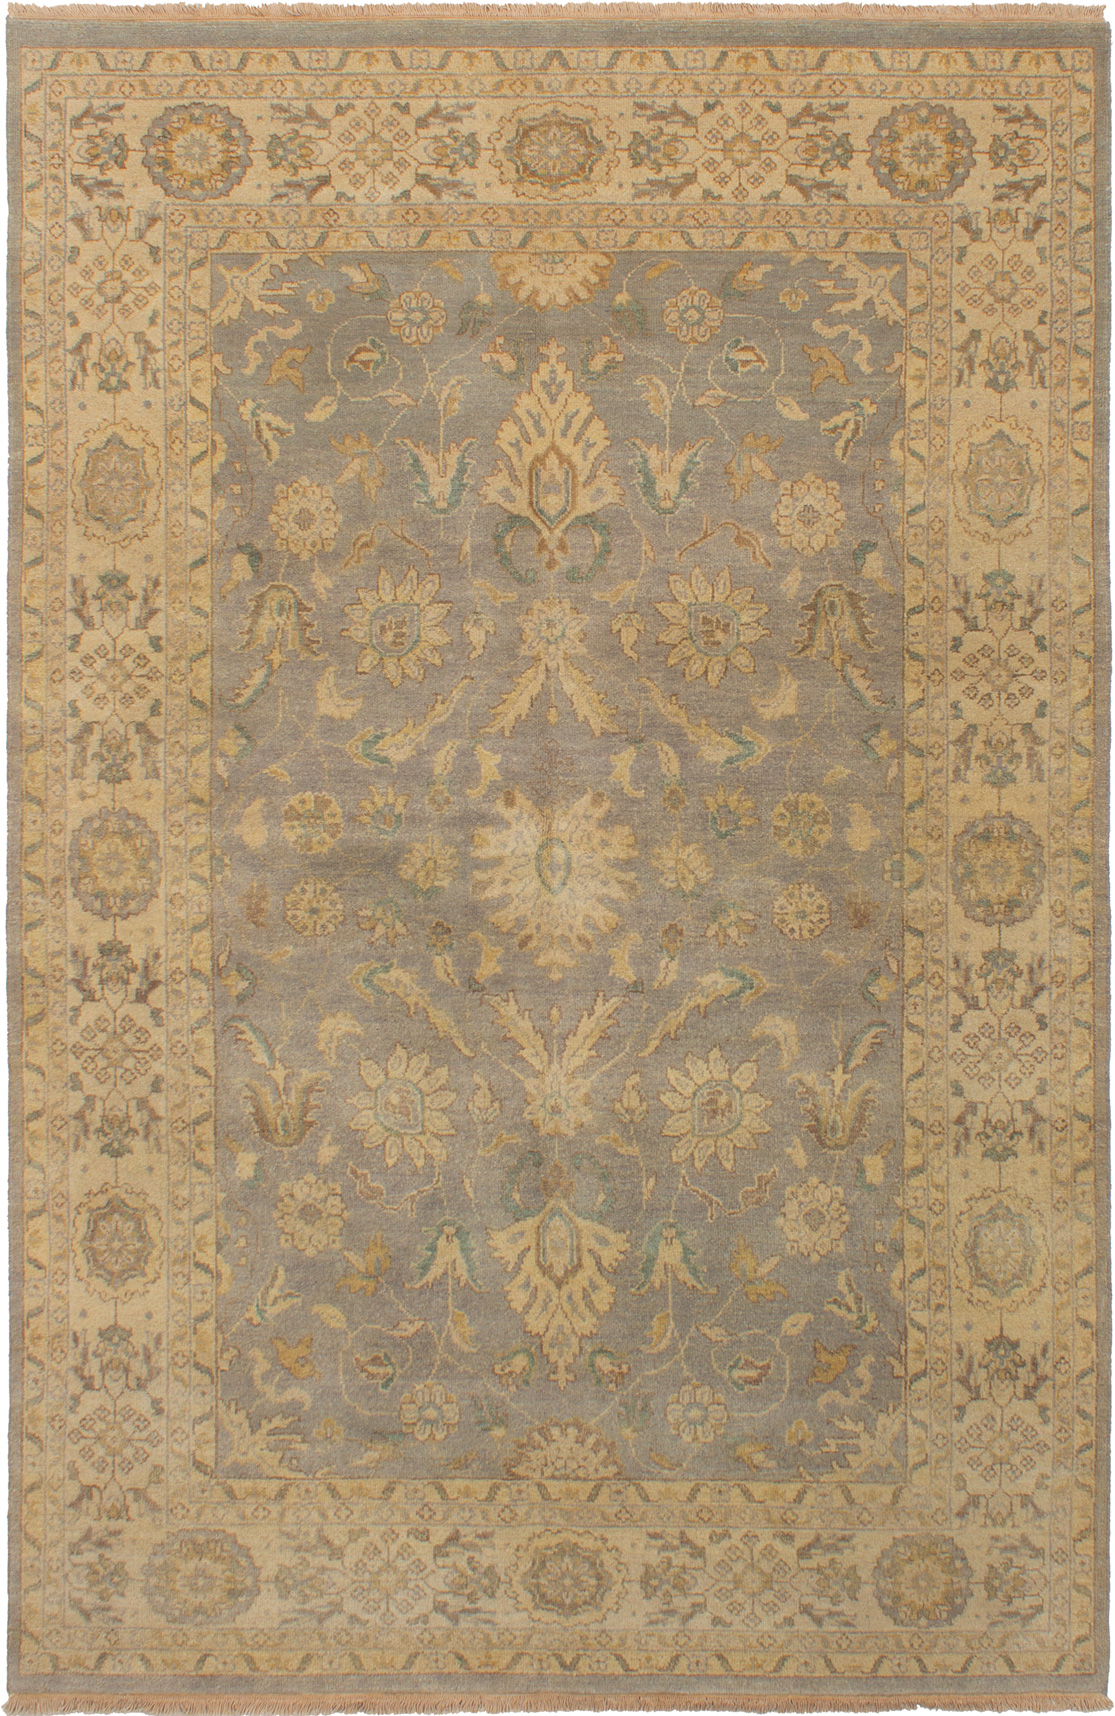 Hand-knotted Elysee Finest Ushak Grey Wool Rug 6'6" x 9'11" Size: 6'6" x 9'11"  